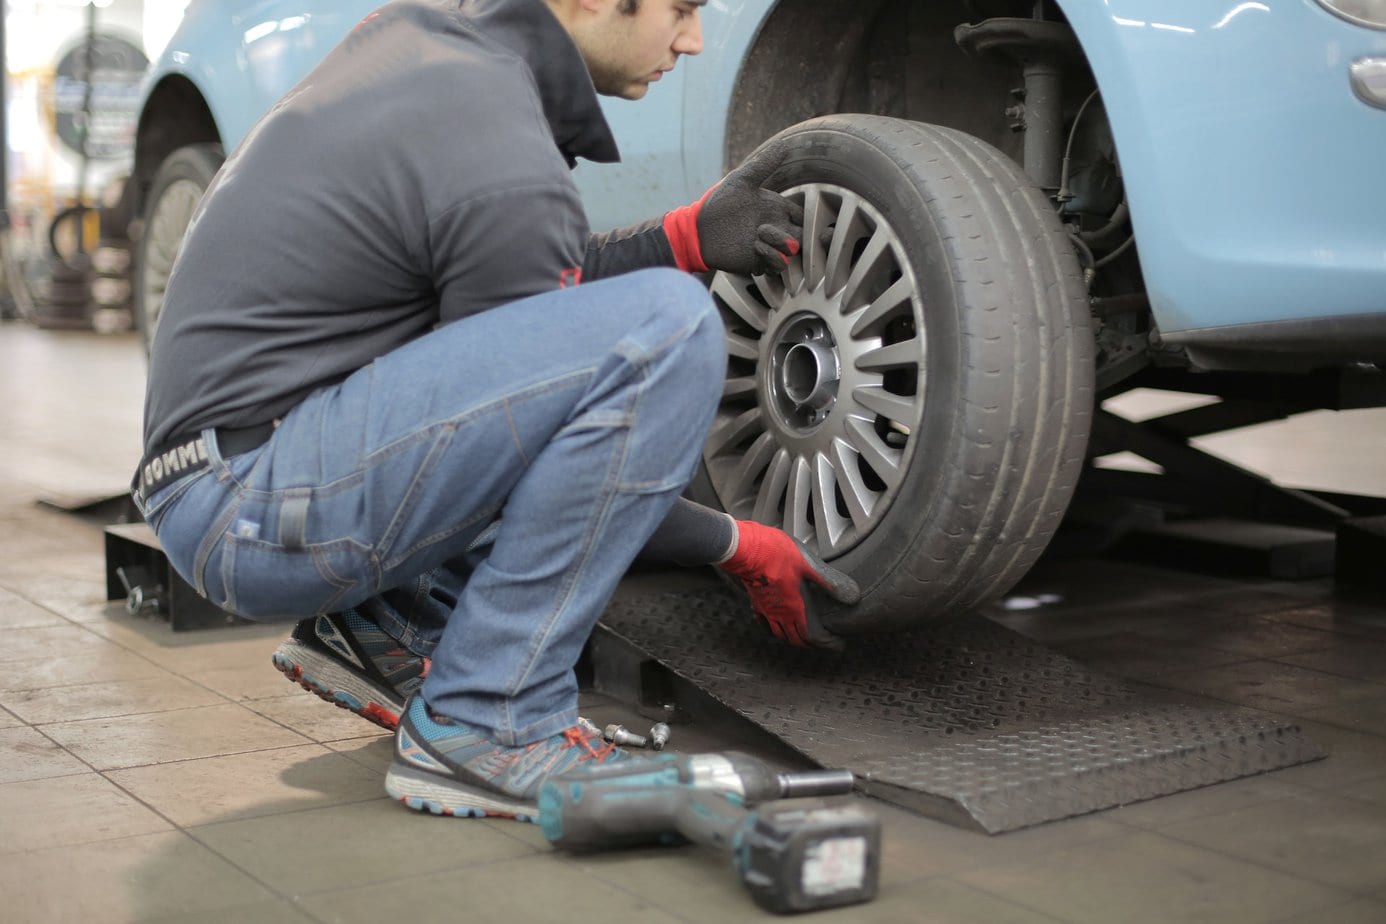 On the Road and Need a Tire Change? Call a Mobile Tire Swap Service in Calgary!